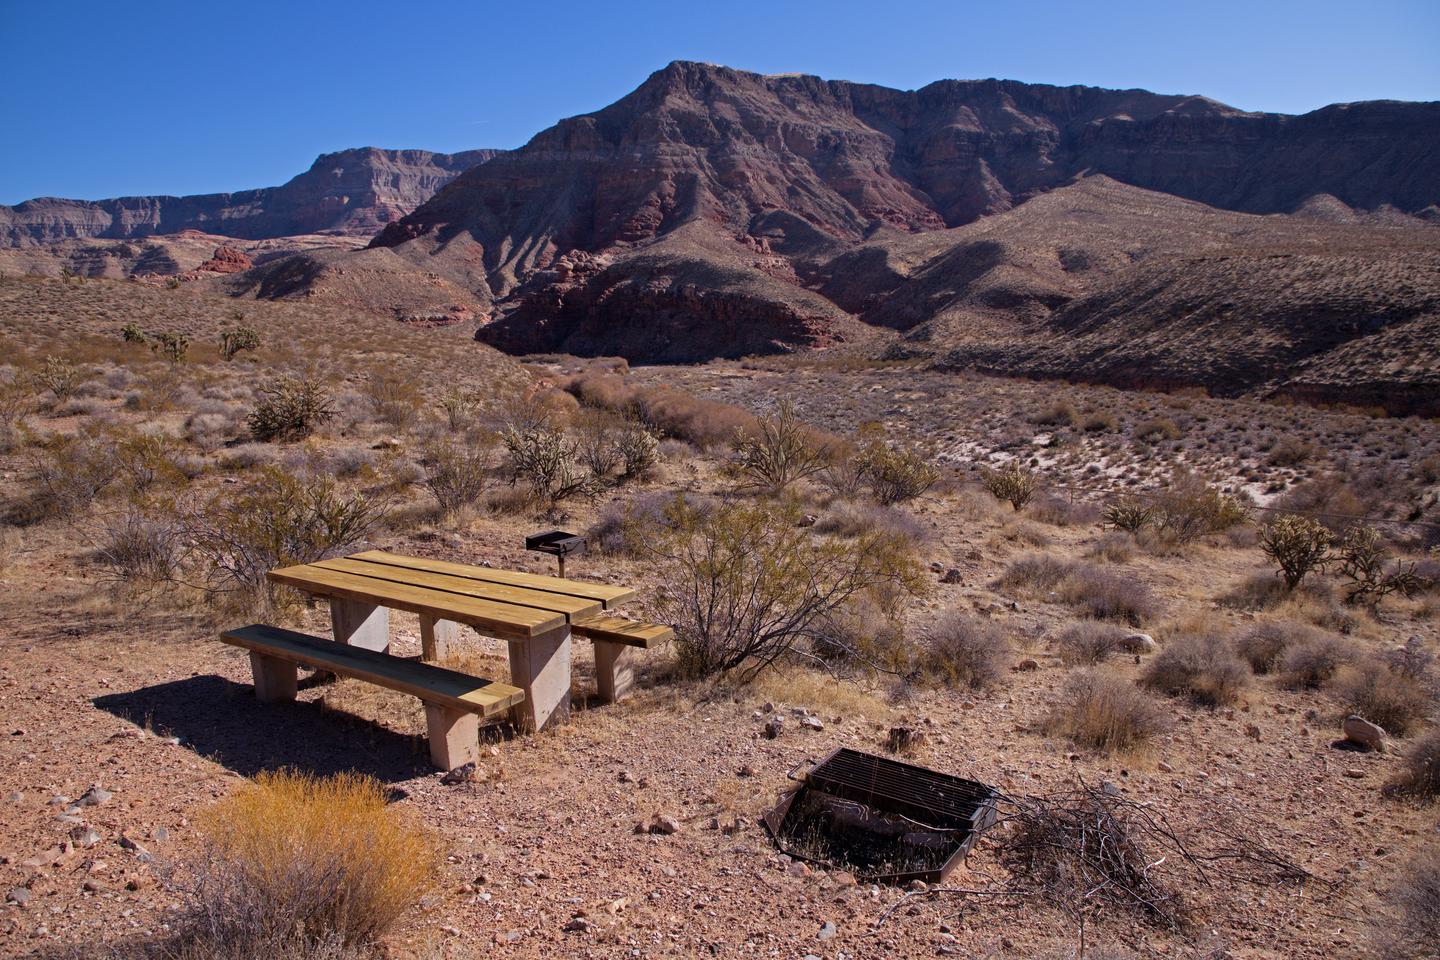 Typical Site overlooking the Paiute Wilderness